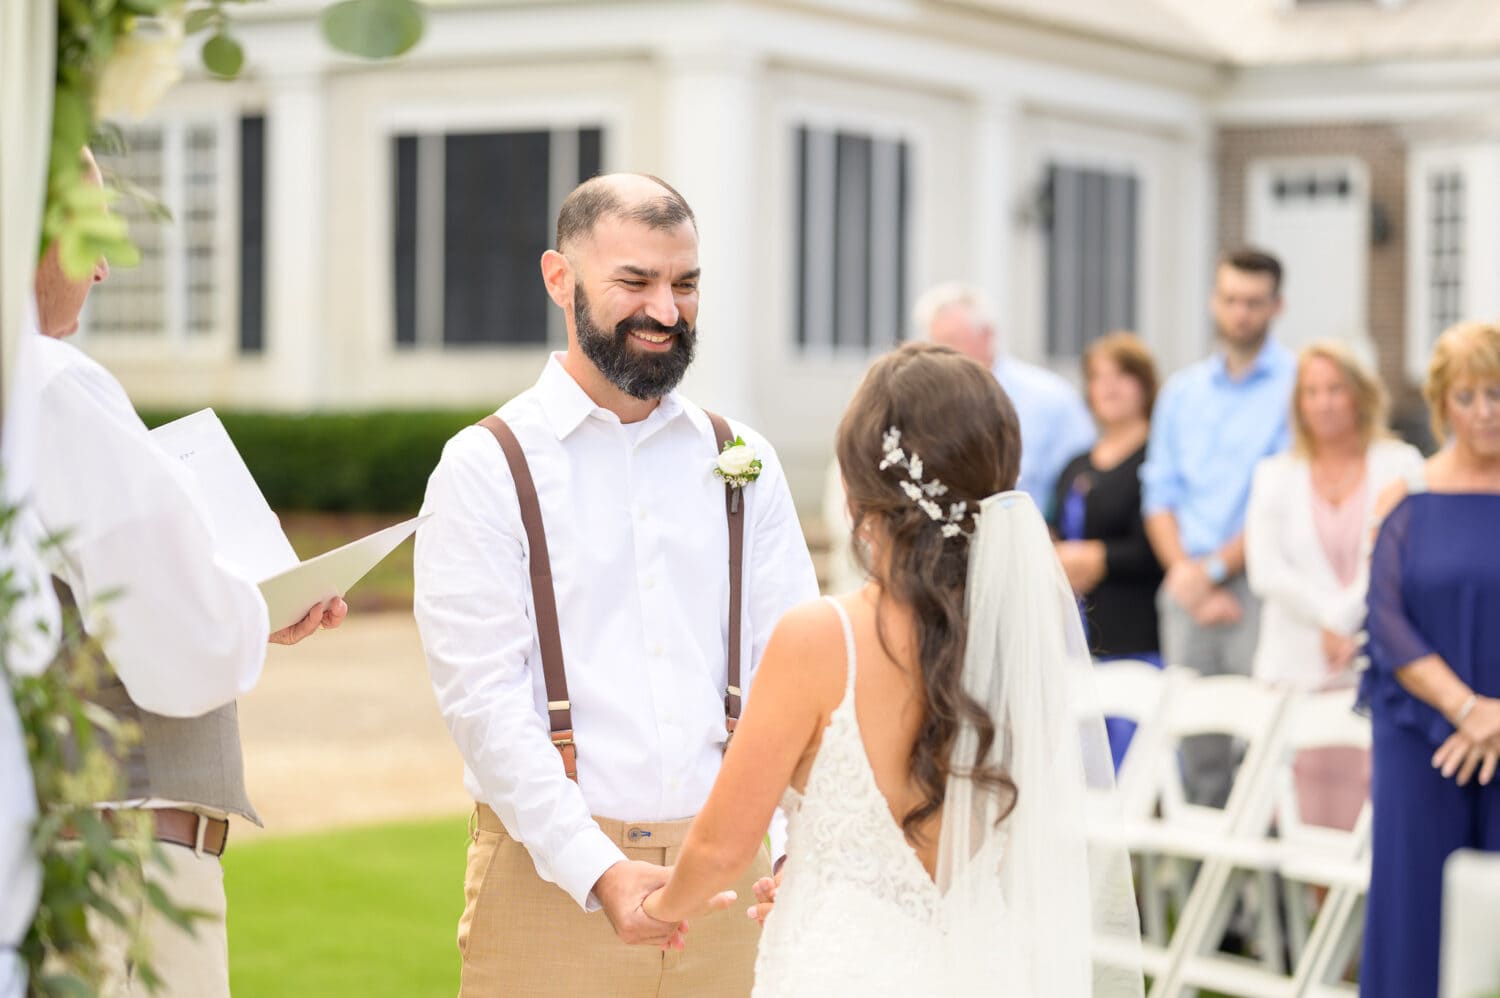 Groom smiling at bride during the ceremony - Pawleys Plantation